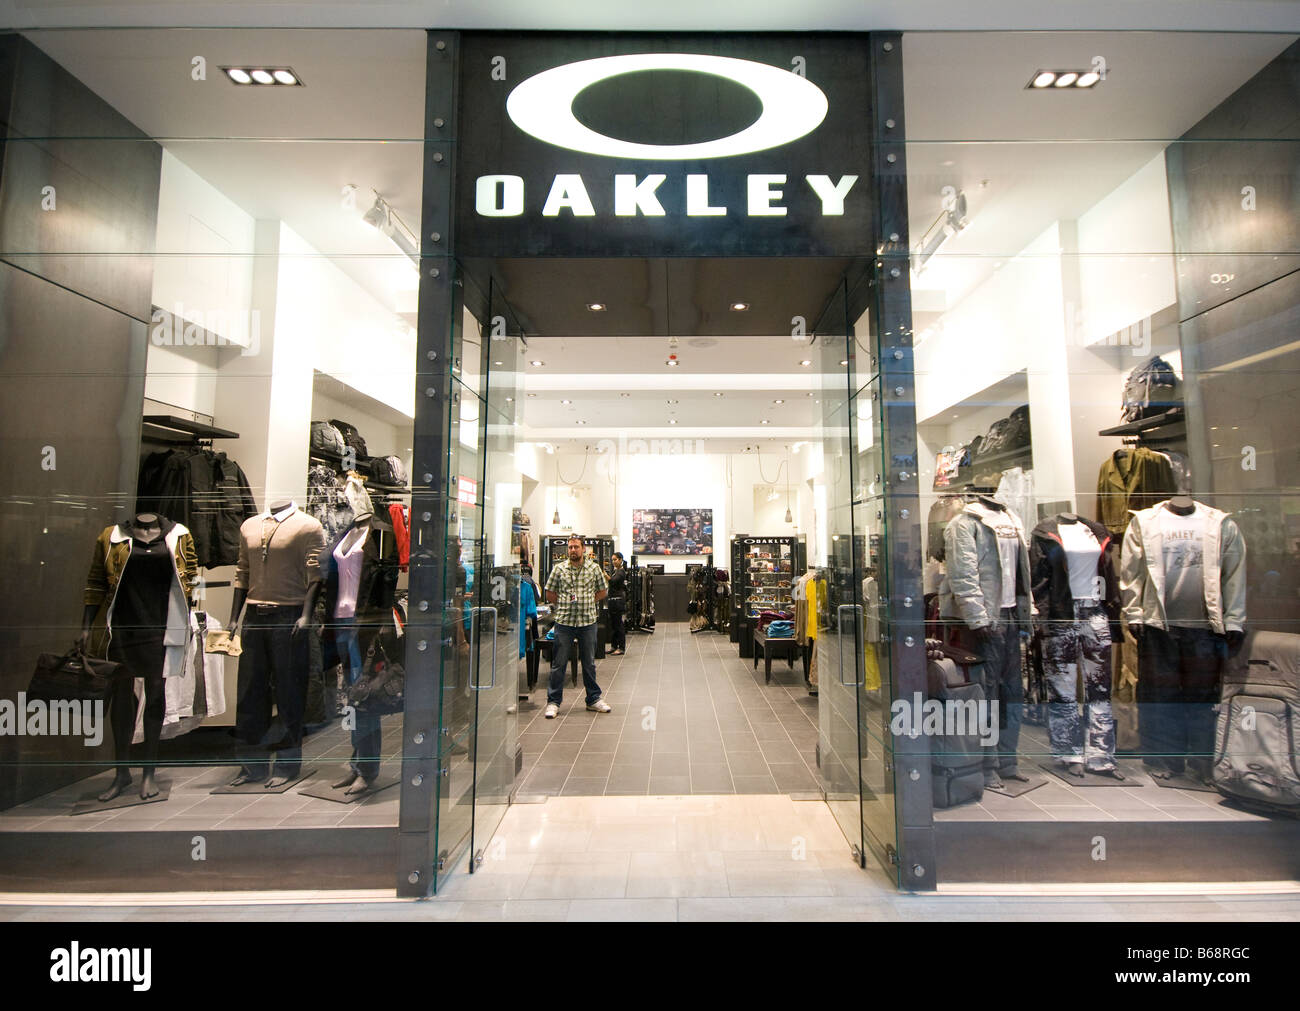 Oakley Shop High Resolution Stock Photography and Images - Alamy